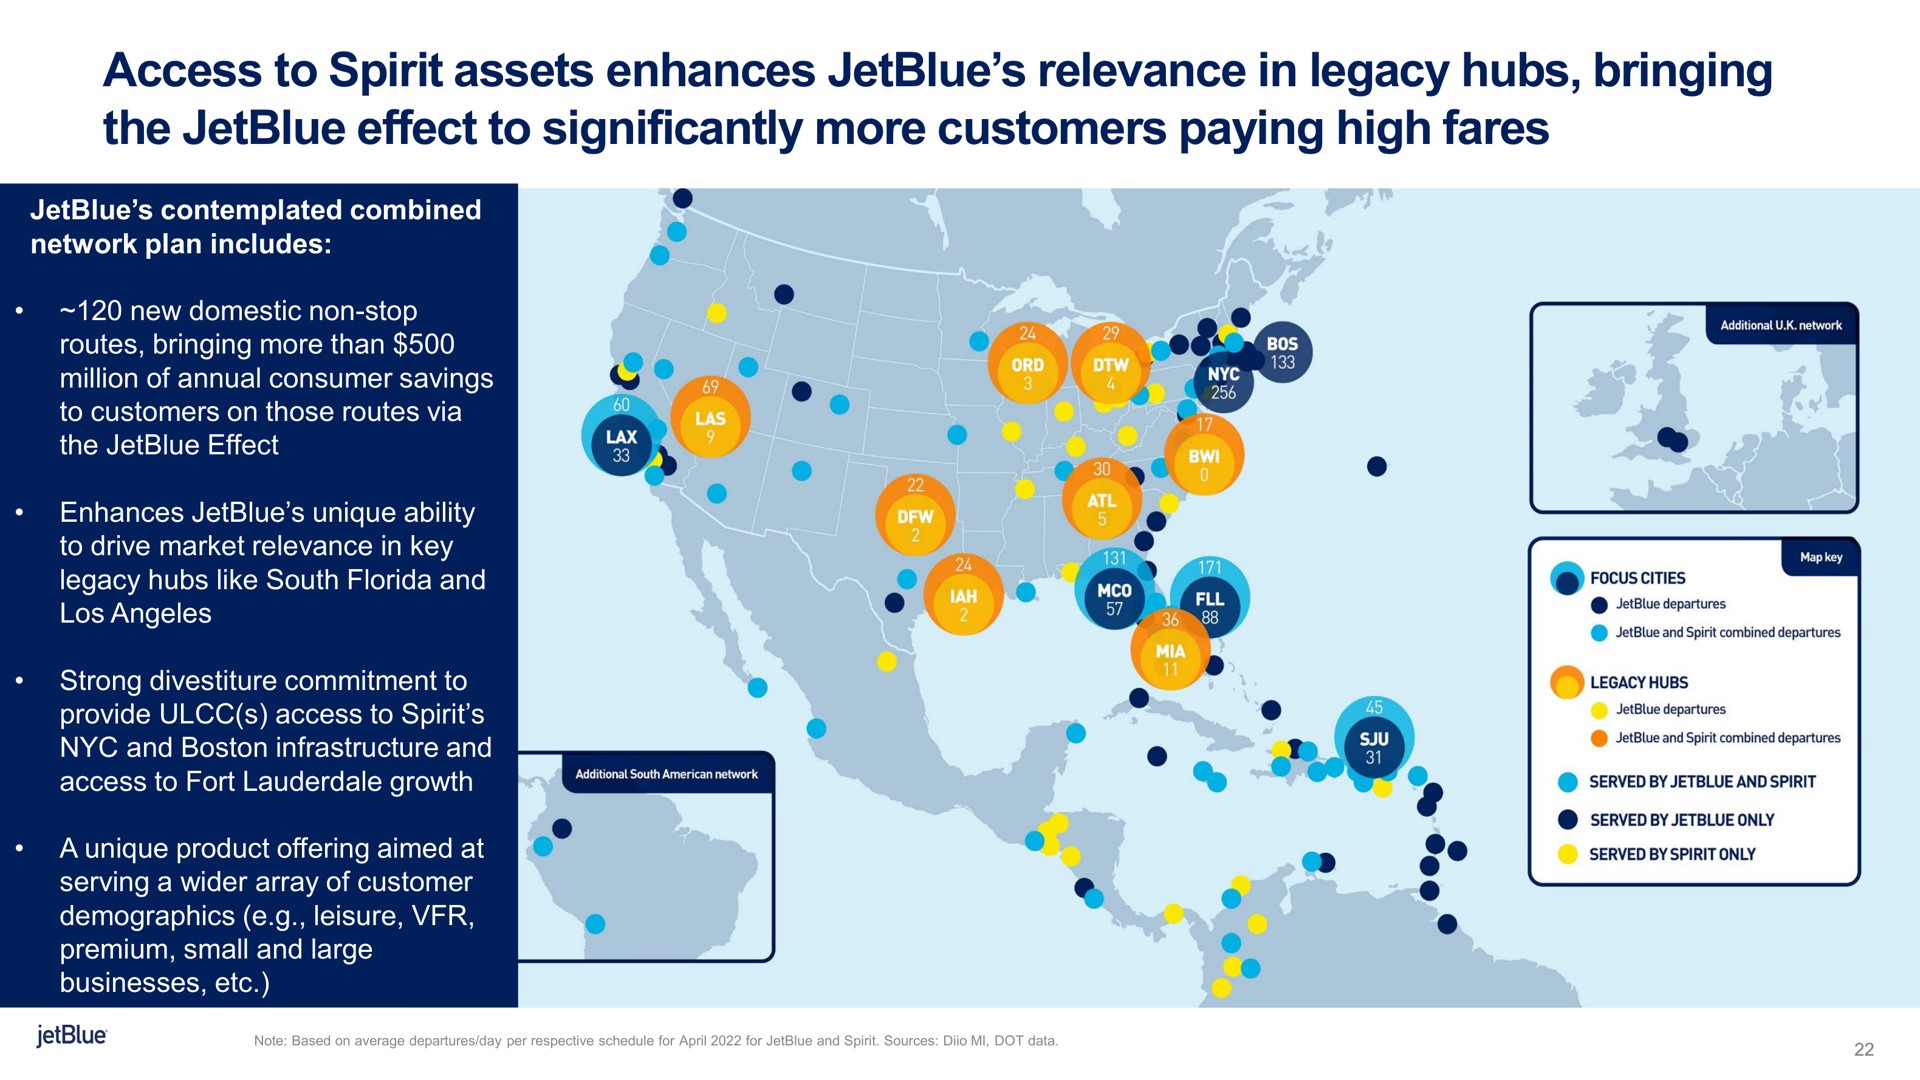 access to spirit assets enhances relevance in legacy hubs bringing the effect to significantly more customers paying high fares | jetBlue